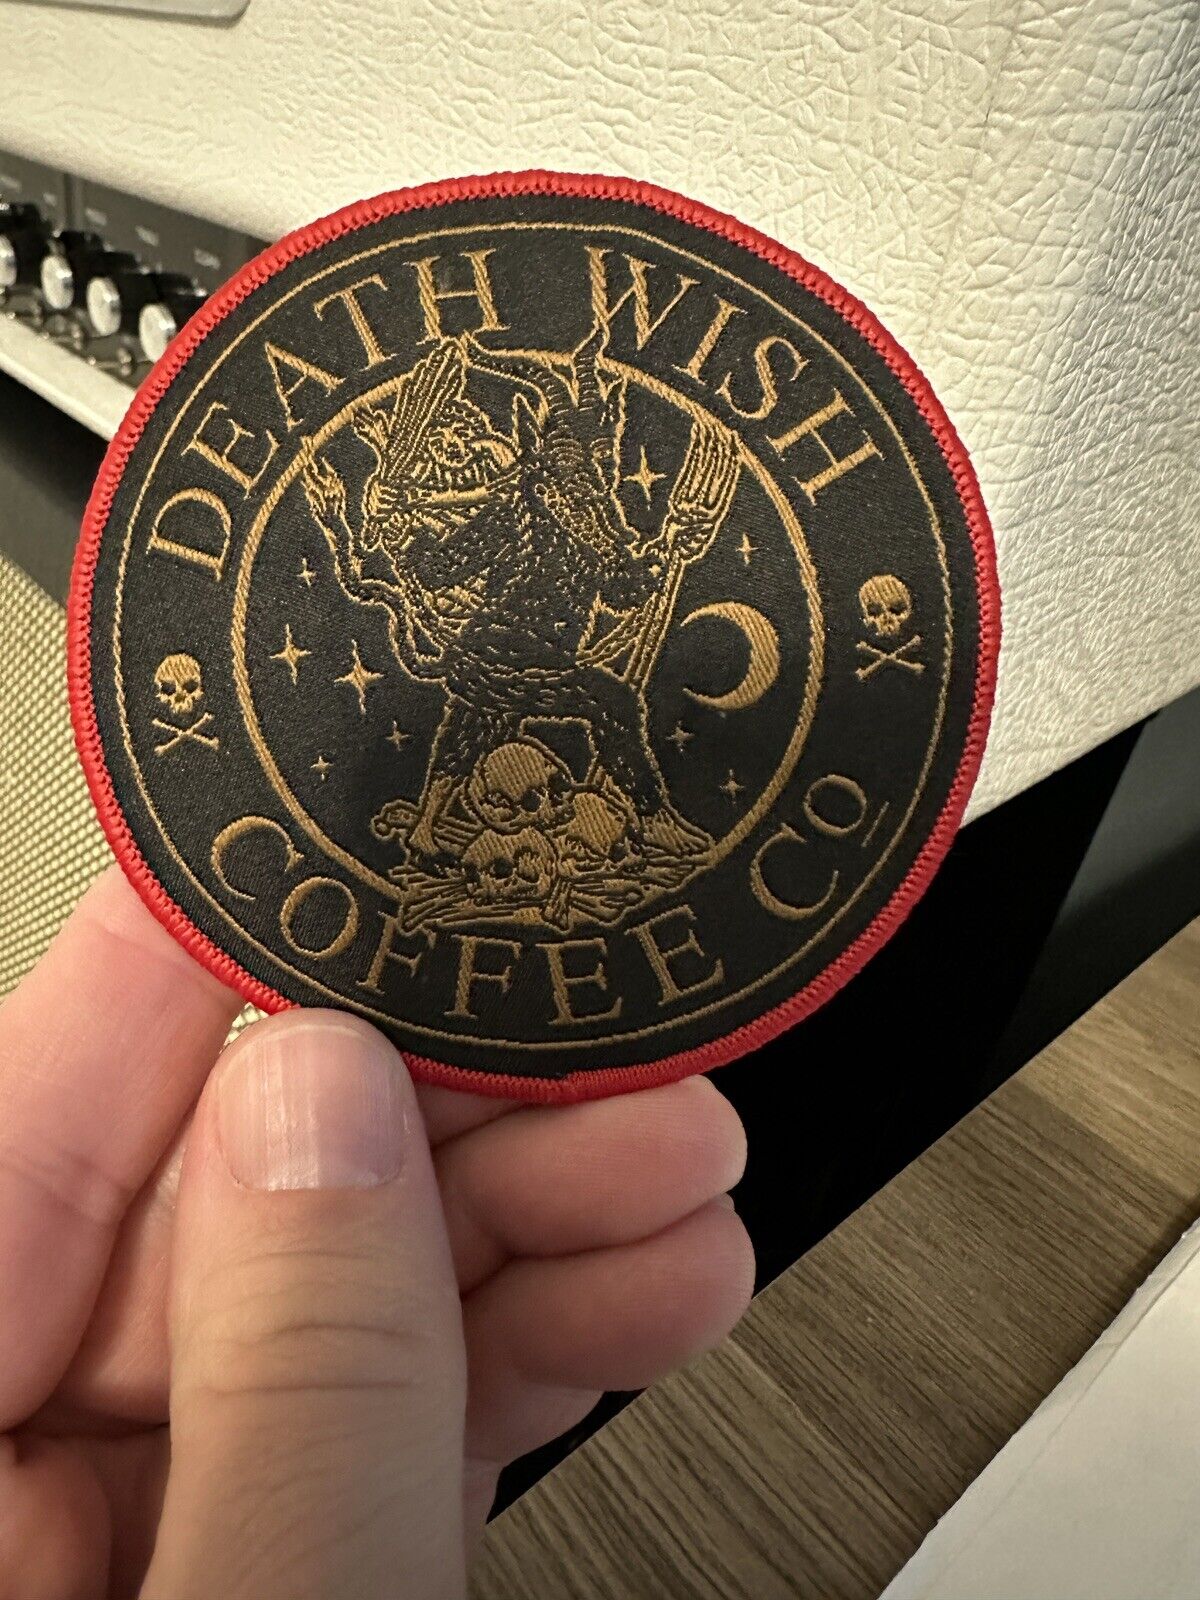 Death Wish Coffee Co Krampus Christmas 2019 Patch RARE OOP